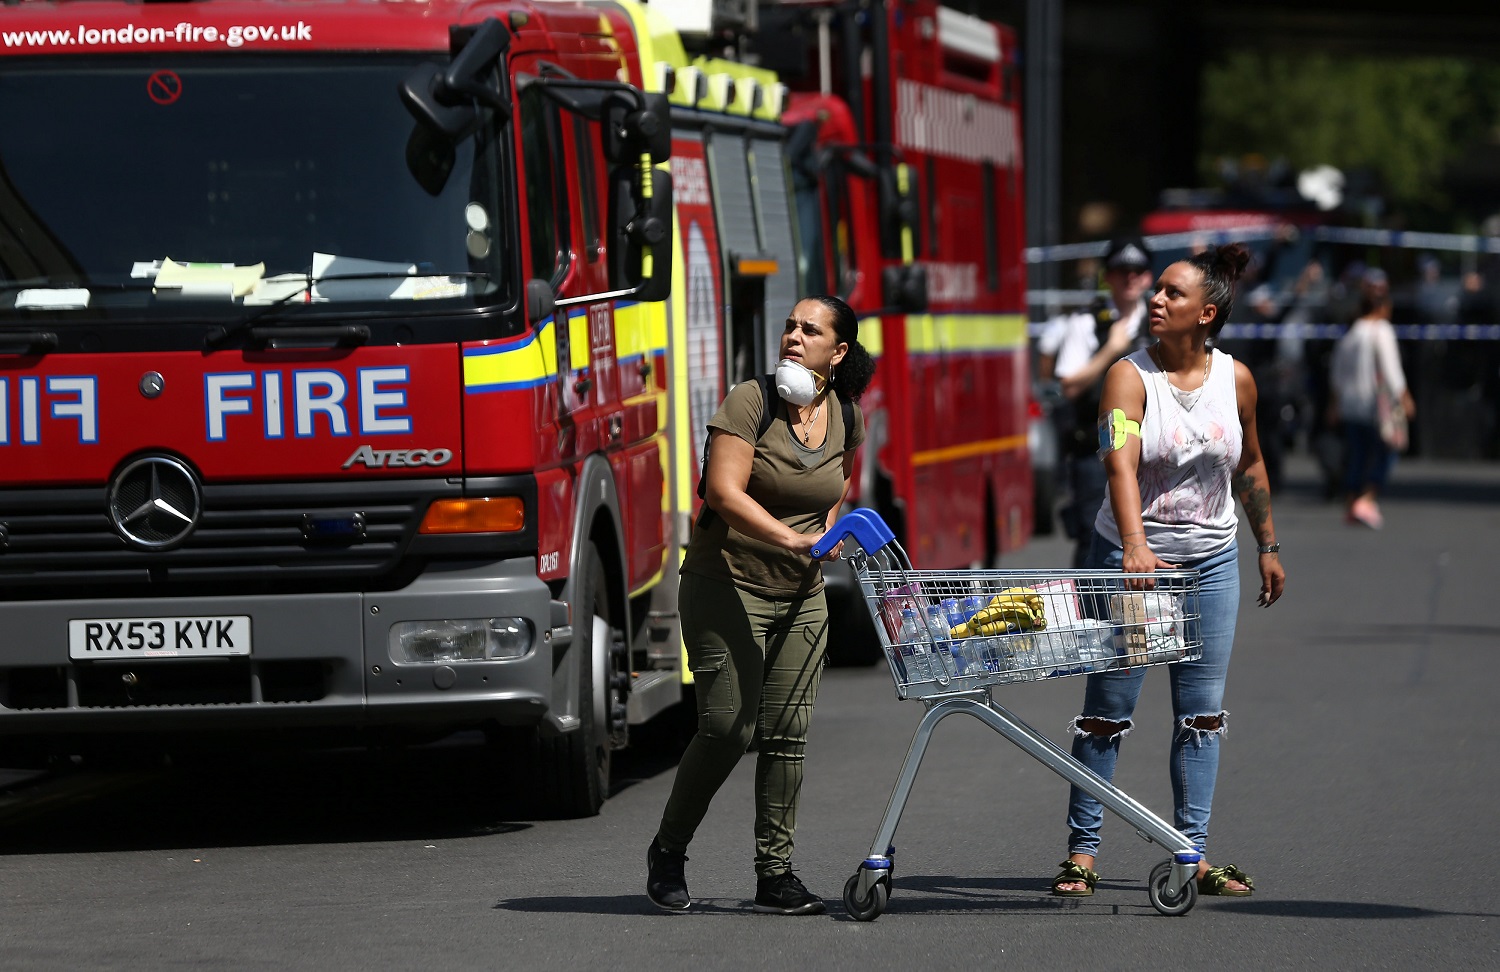 People react near a tower block severely damaged by a serious fire, in north Kensington, West London, Britain June 14, 2017. REUTERS/Neil Hall